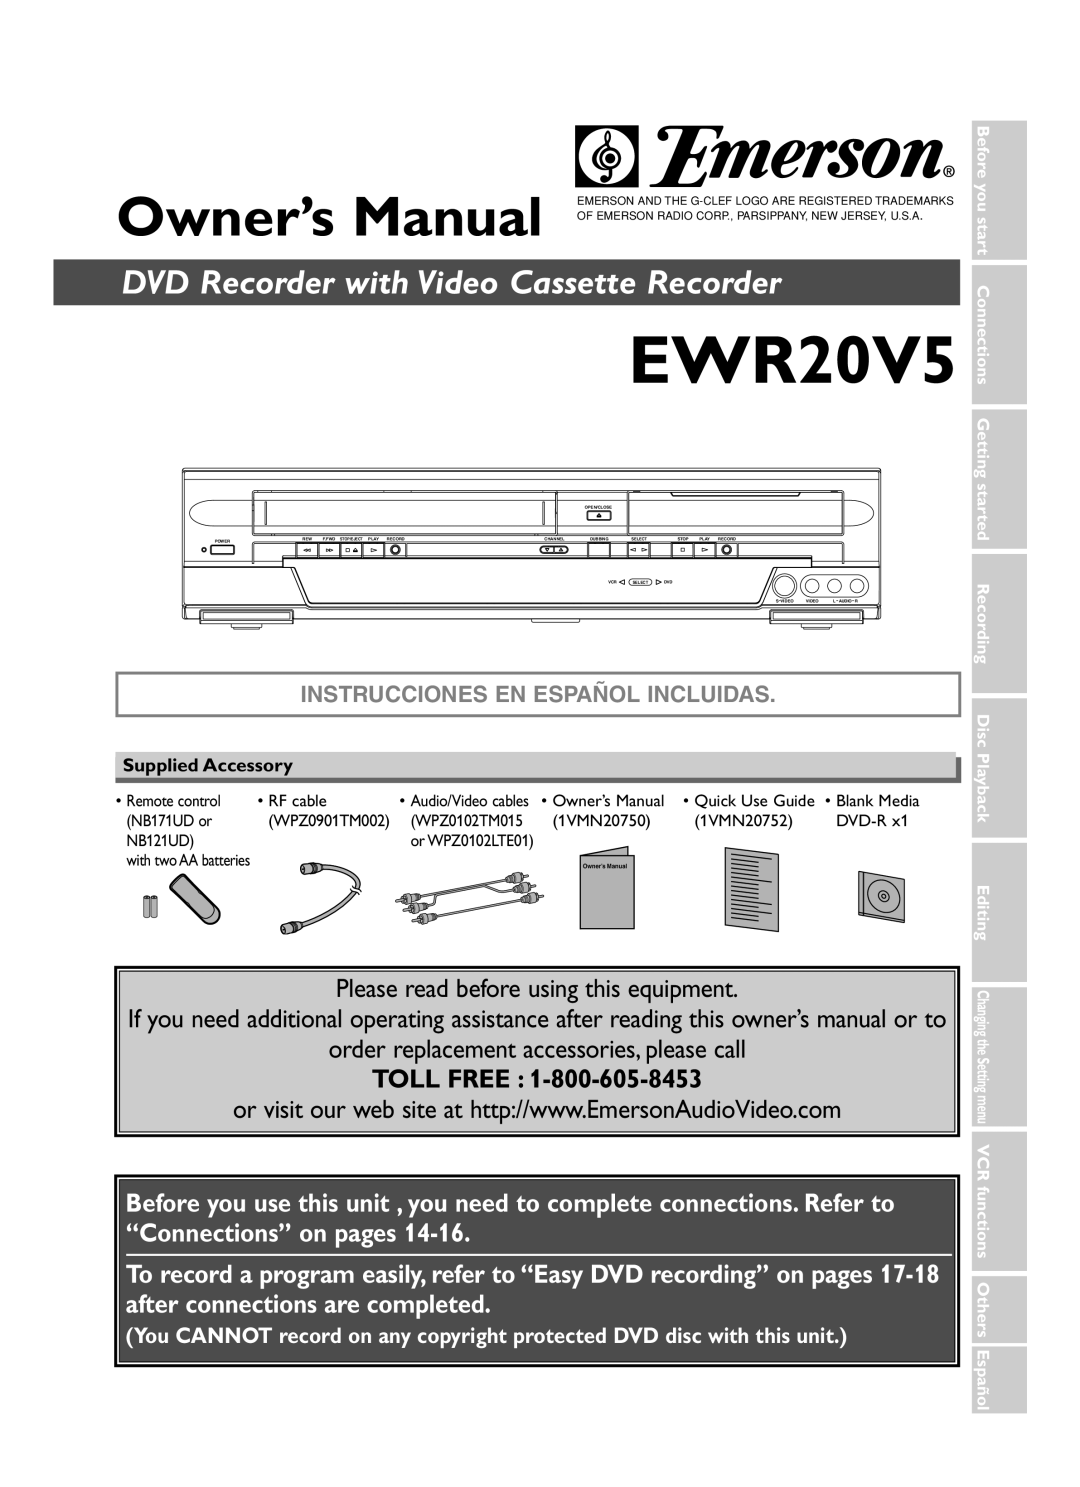 Emerson EWR20V5 owner manual Owner’s Manual, DVD Recorder with Video Cassette Recorder 